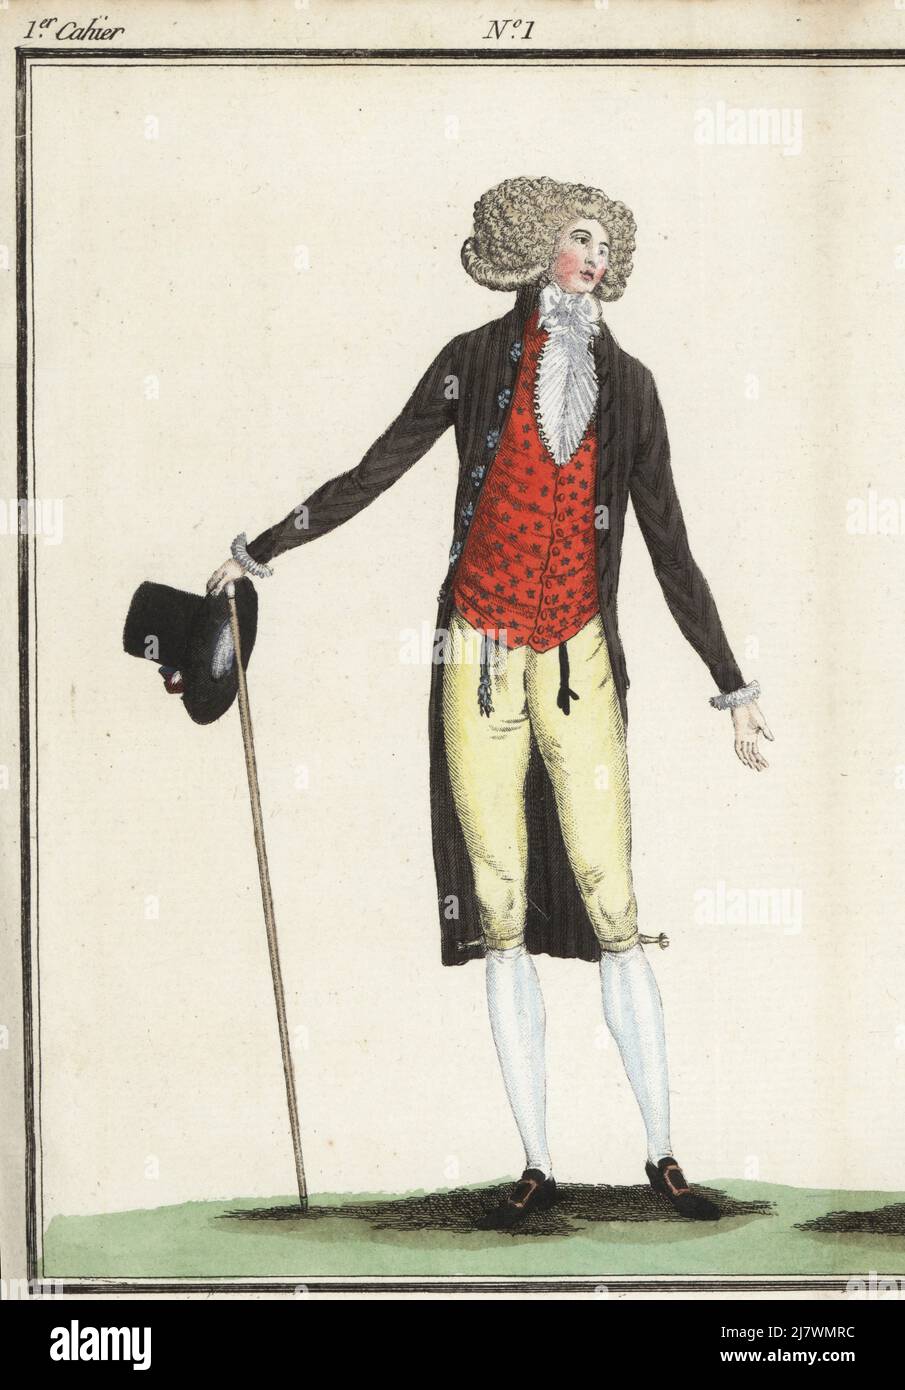 Fashionable man in black coat a la Revolution, cravatte over a large jabot. cashmere waistcoat or gilet, yellow culottes, silk hose, and buckle shoes. With cane and top hat. Handcoloured copperplate engraving from Jean-Antoine le Brun or Lebrun-Tossa’s Journal de la Mode et du Gout, previously Cabinet des Modes, Chez Buisson, Paris, and Joseph le Boffe, London, Premier Cahier, February 1790. Stock Photo